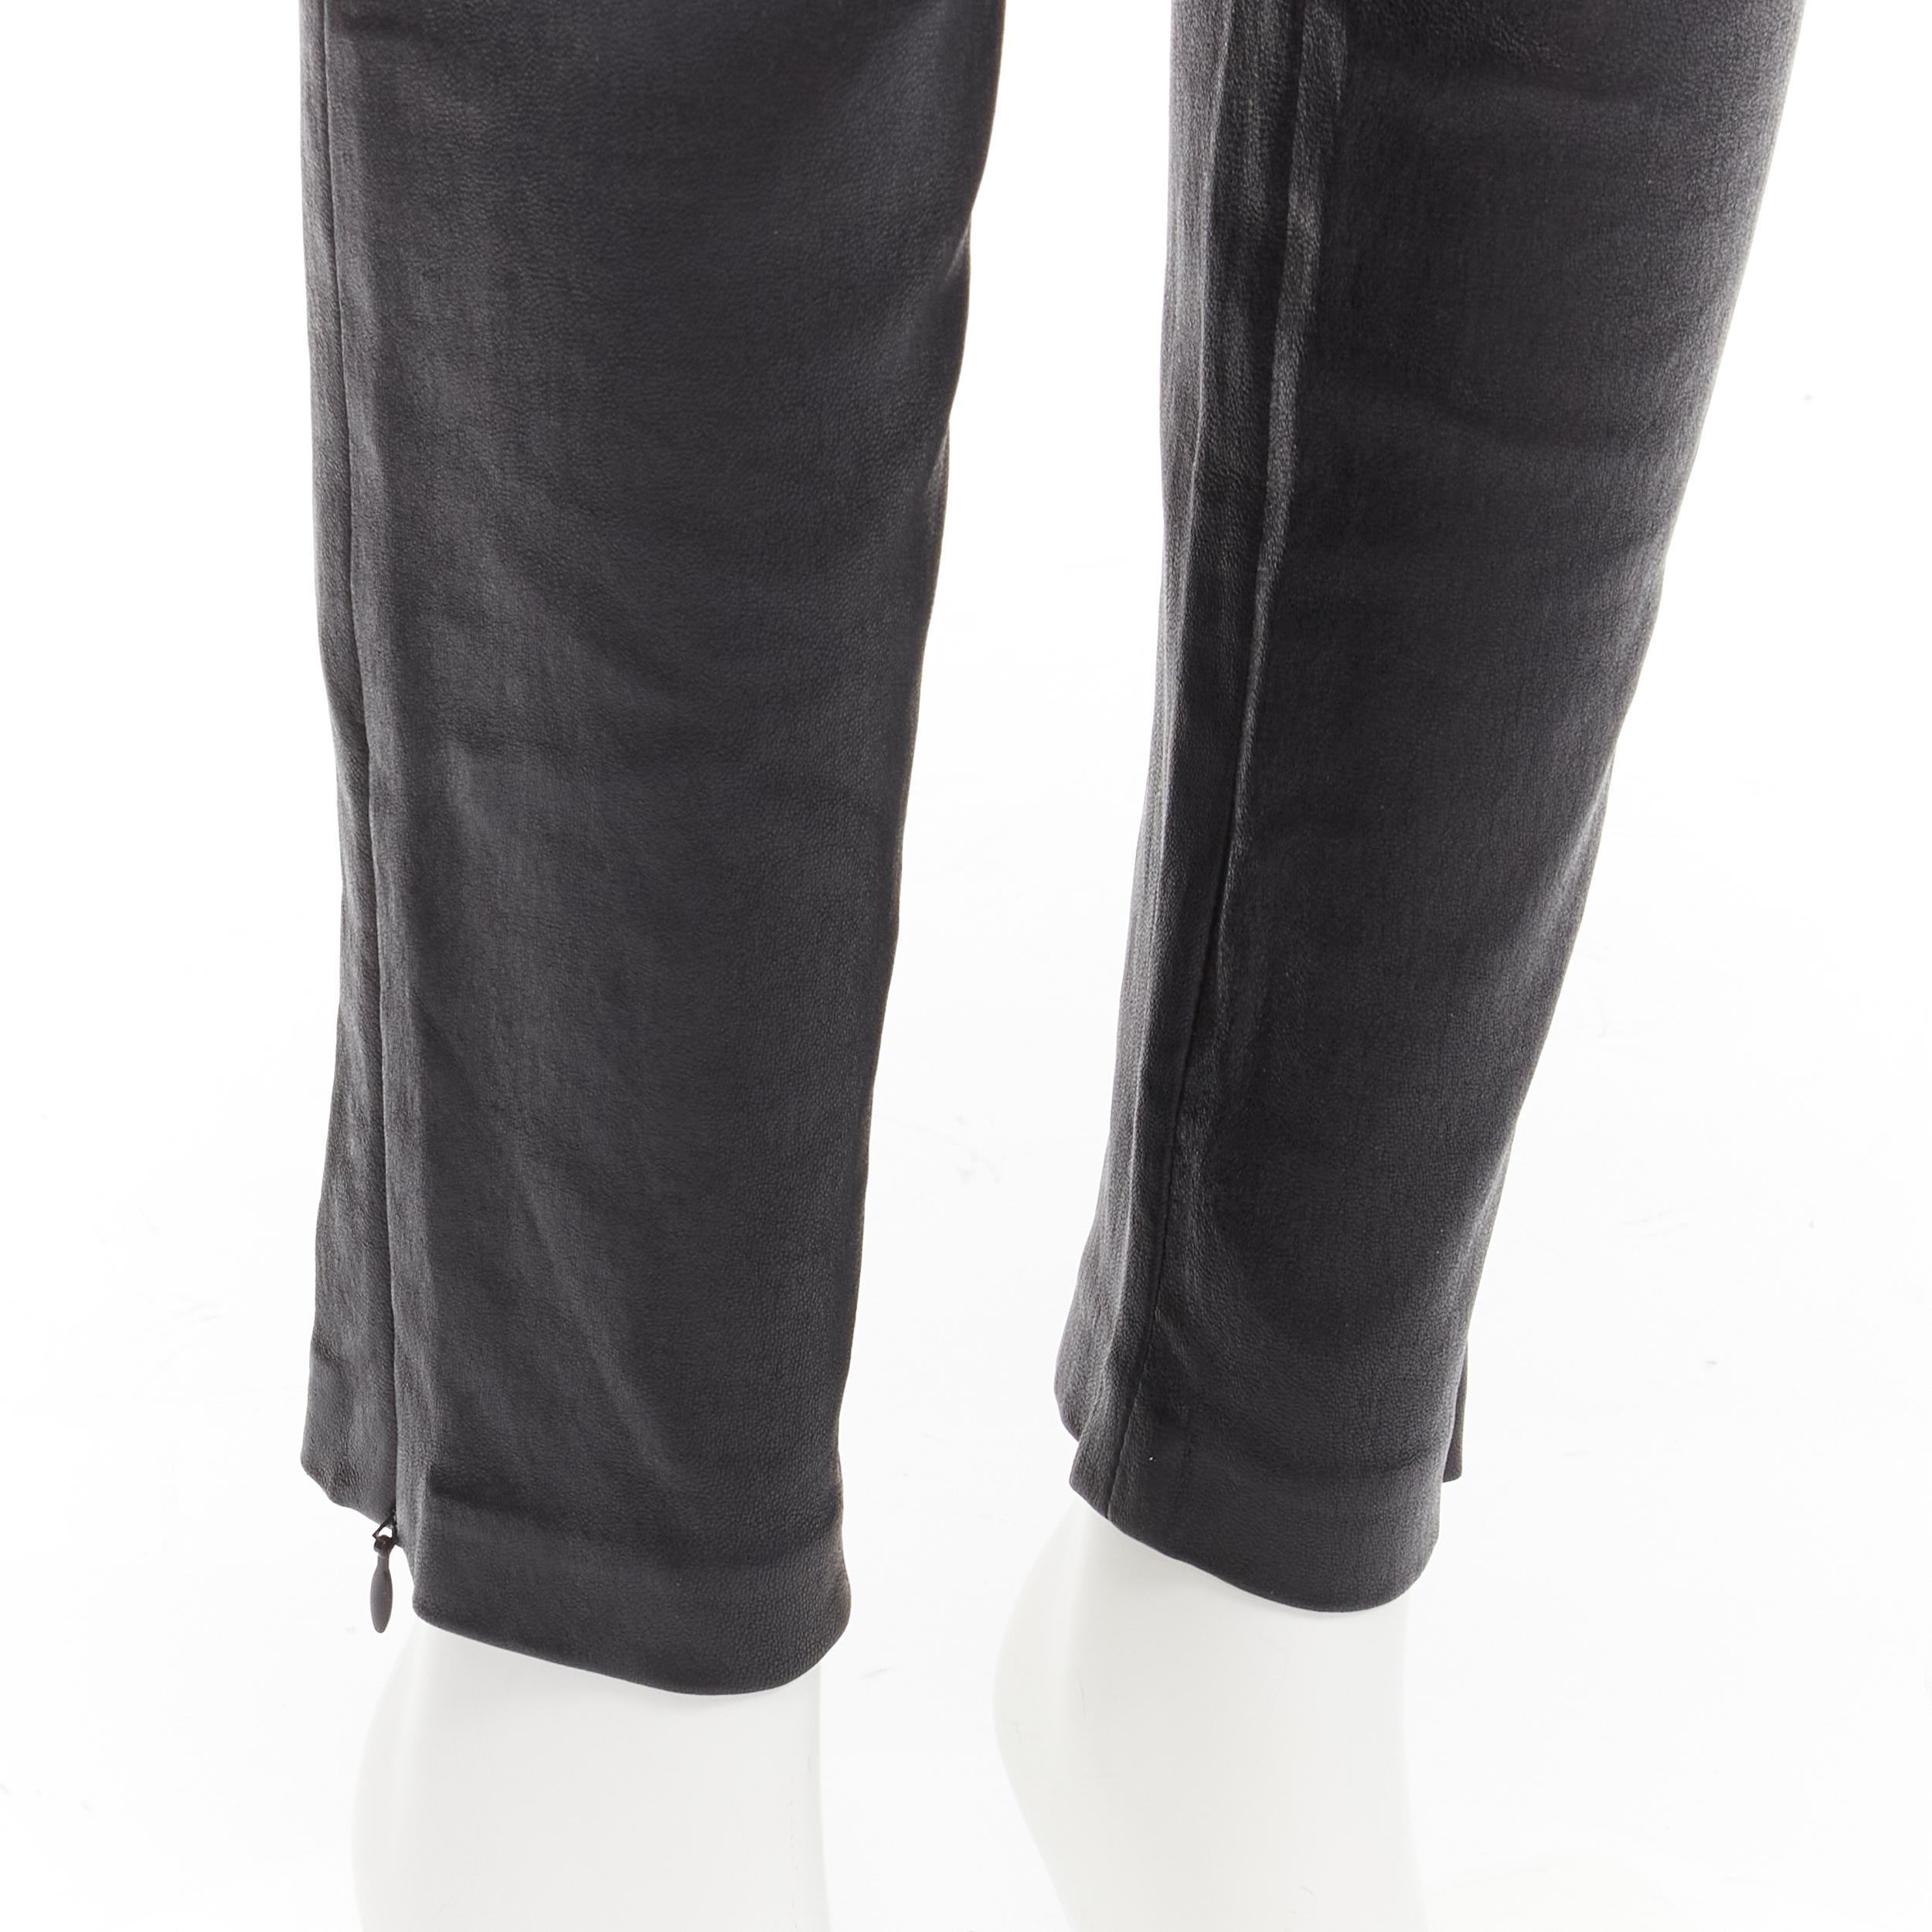 CHRISTIAN DIOR black lambskin leather skinny leggings pants FR36 S
Reference: TGAS/C01872
Brand: Christian Dior
Designer: Raf Simons
Material: Lambskin Leather
Color: Black
Pattern: Solid
Closure: Zip
Lining: Fabric
Extra Details: Invisible side